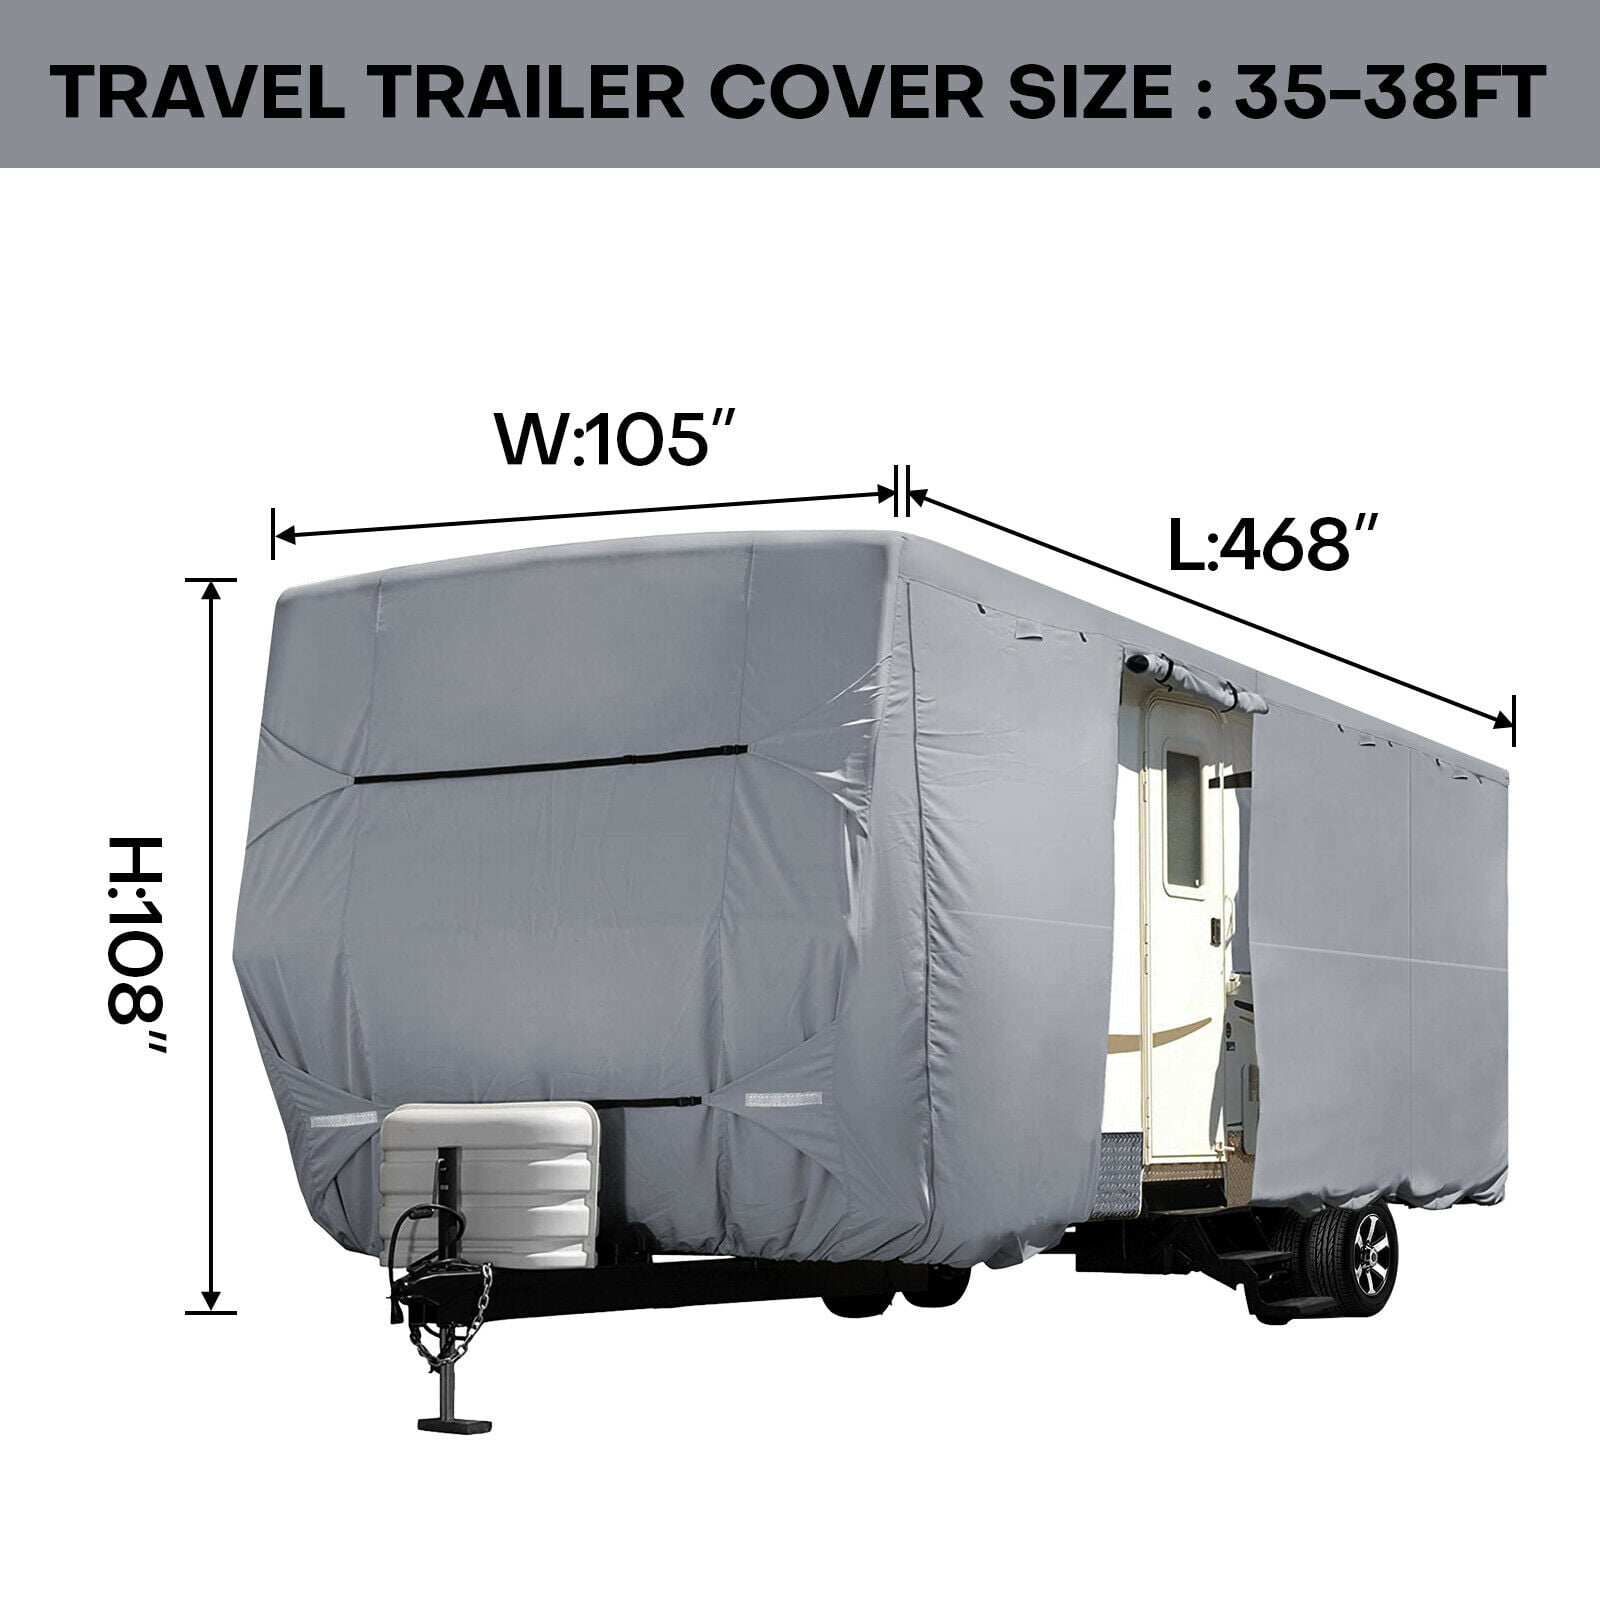 Side Storage Areas Waterproof Durable RV Motorhome Travel Trailer/Toy Hauler Cover Fits Length 20-22 Travel Trailer Camper Zippered Panels Allow Access To The Door Engine and Ramp Door